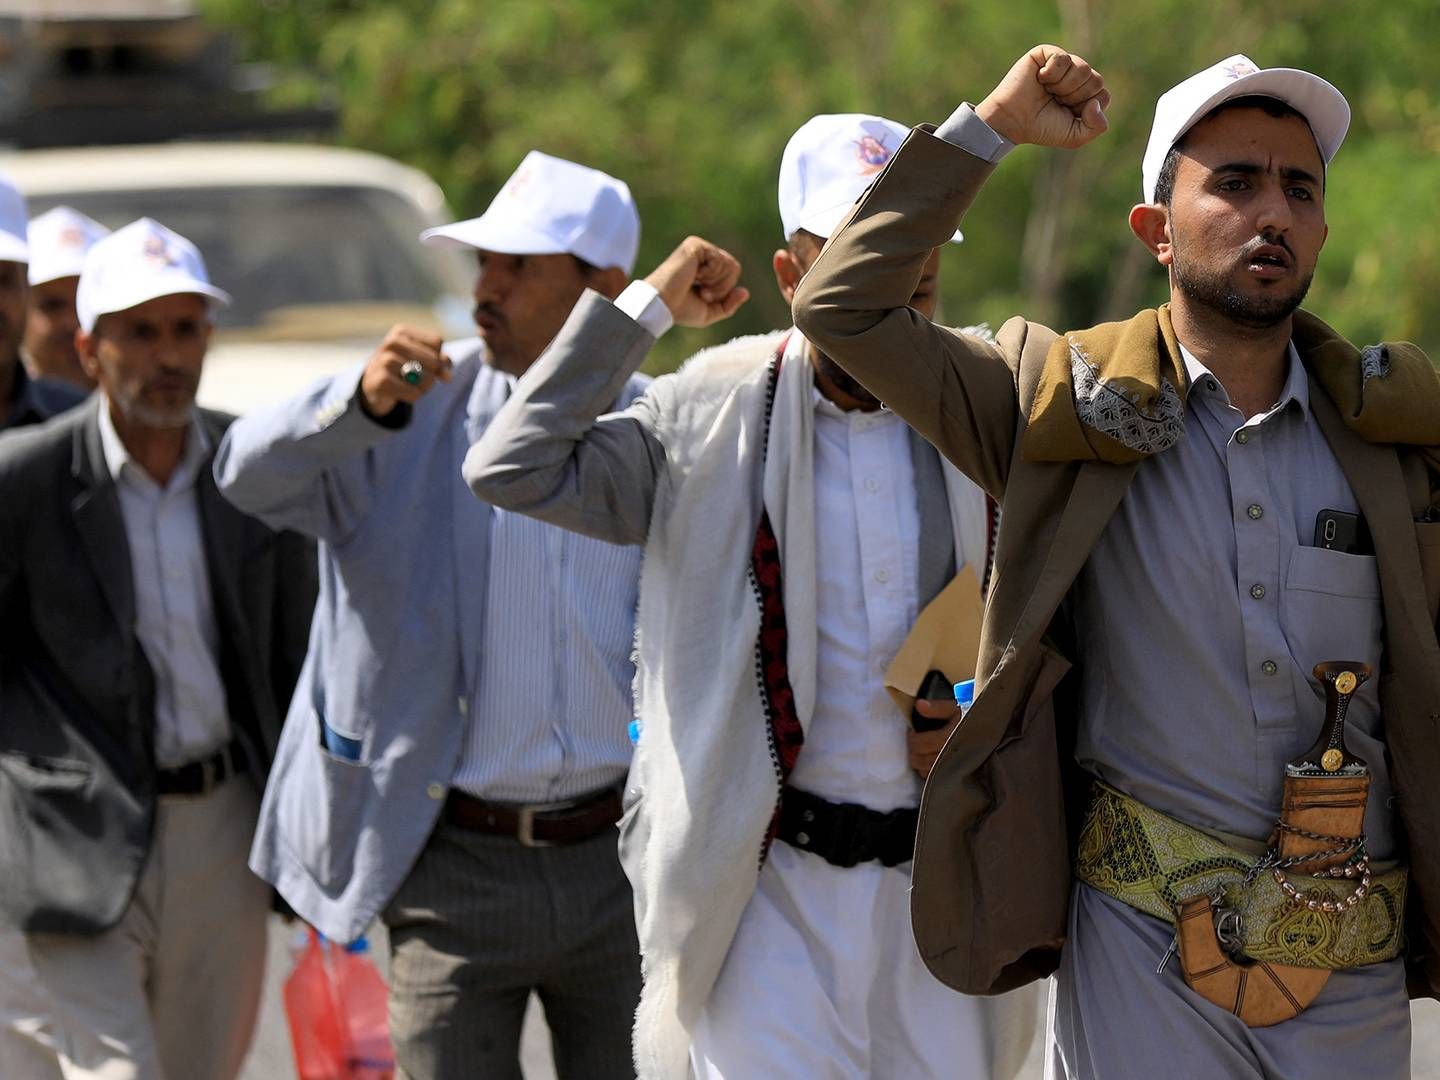 Yemenis march on June 10 to express their support for pro-Palestinian protests around the world in the Houthi-controlled capital Sanaa amid the ongoing conflict in Gaza between Israel and the militant Hamas movement as the Houthis fire on international cargo ships. | Photo: Mohammed Huwais